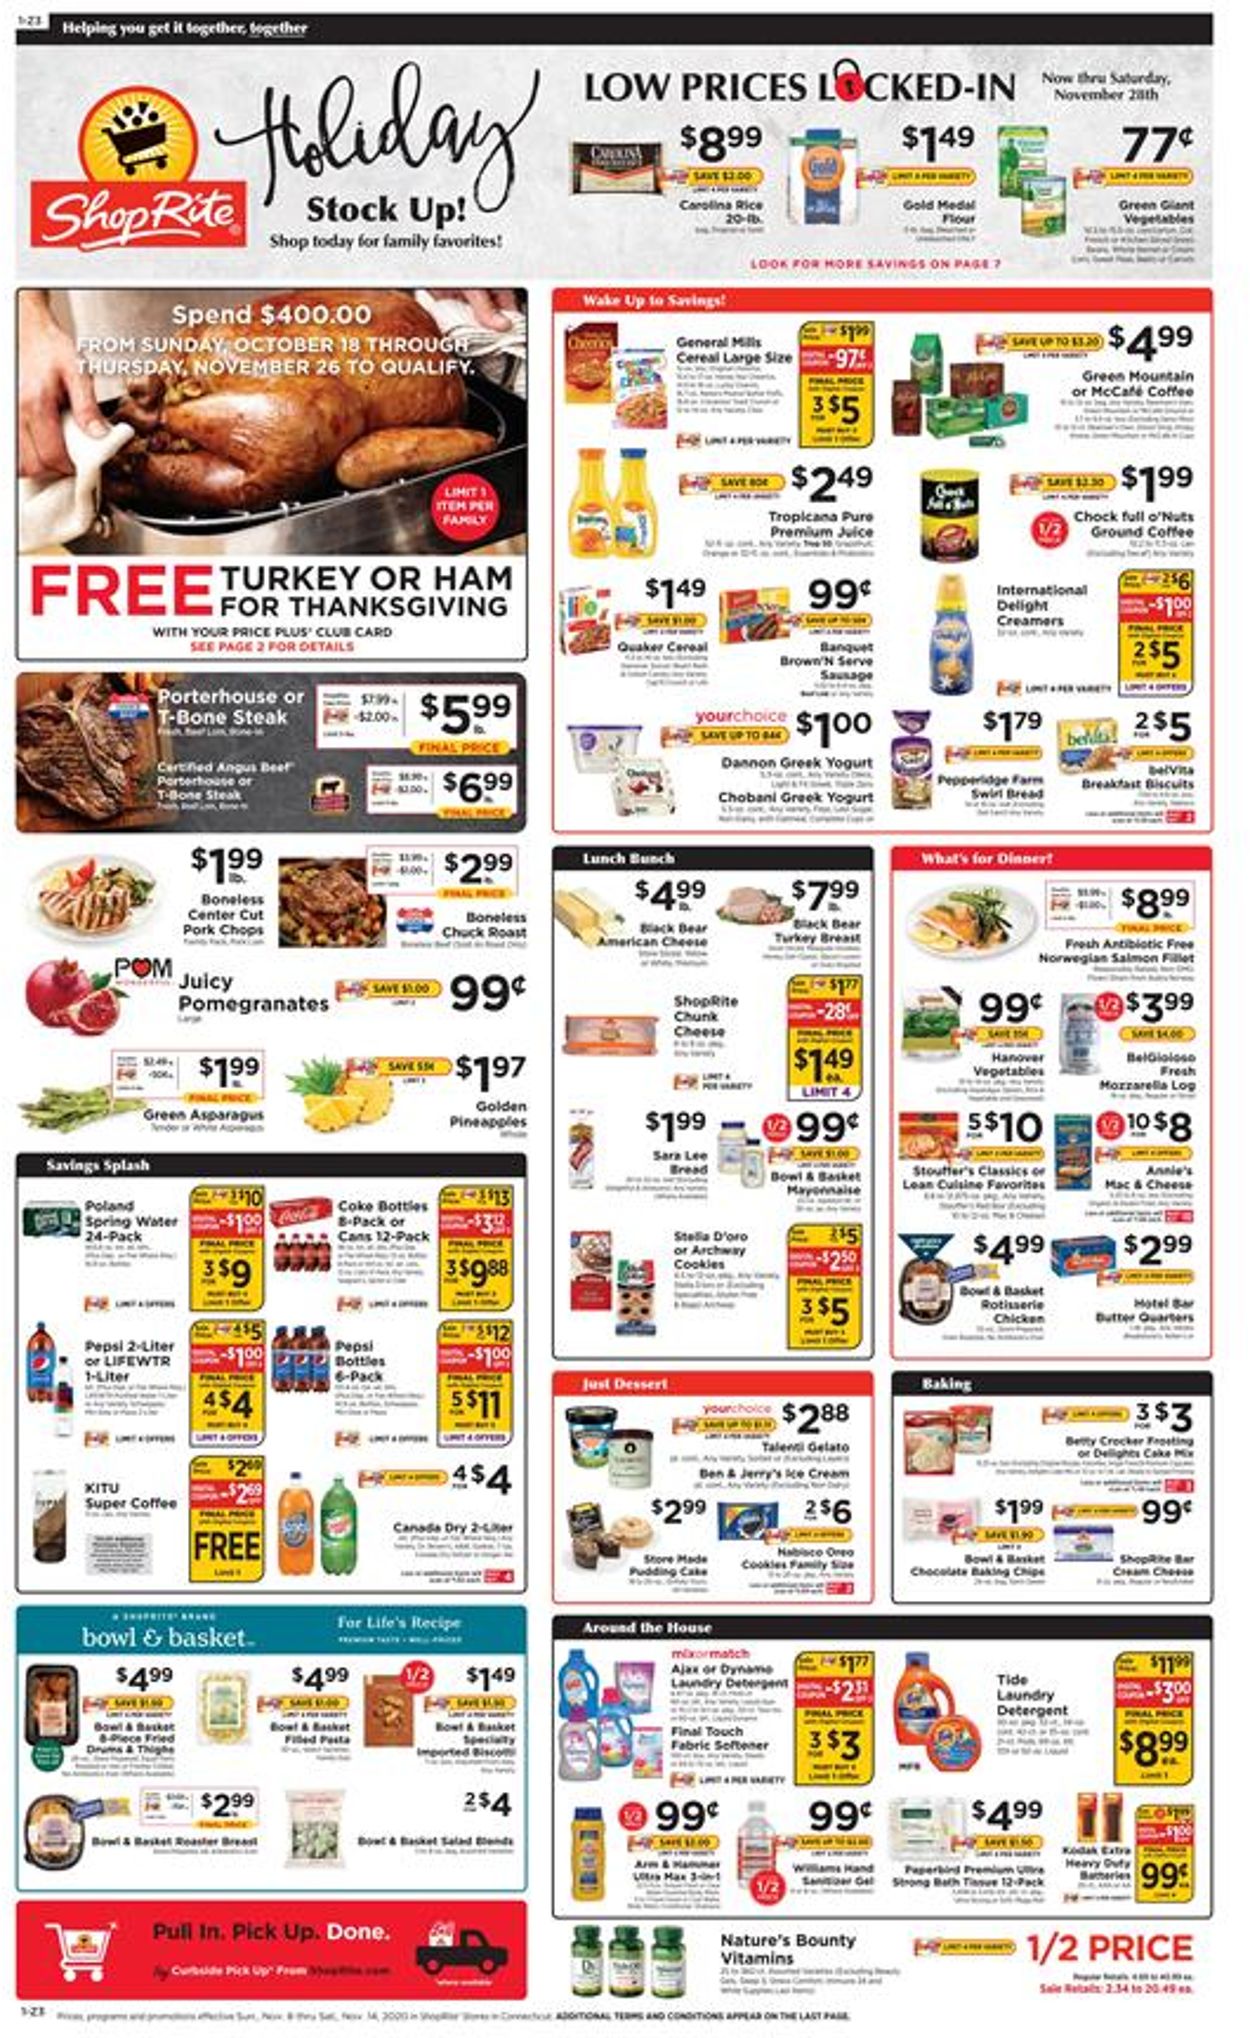 ShopRite Holiday Current weekly ad 11/08 - 11/14/2020 - frequent-ads.com